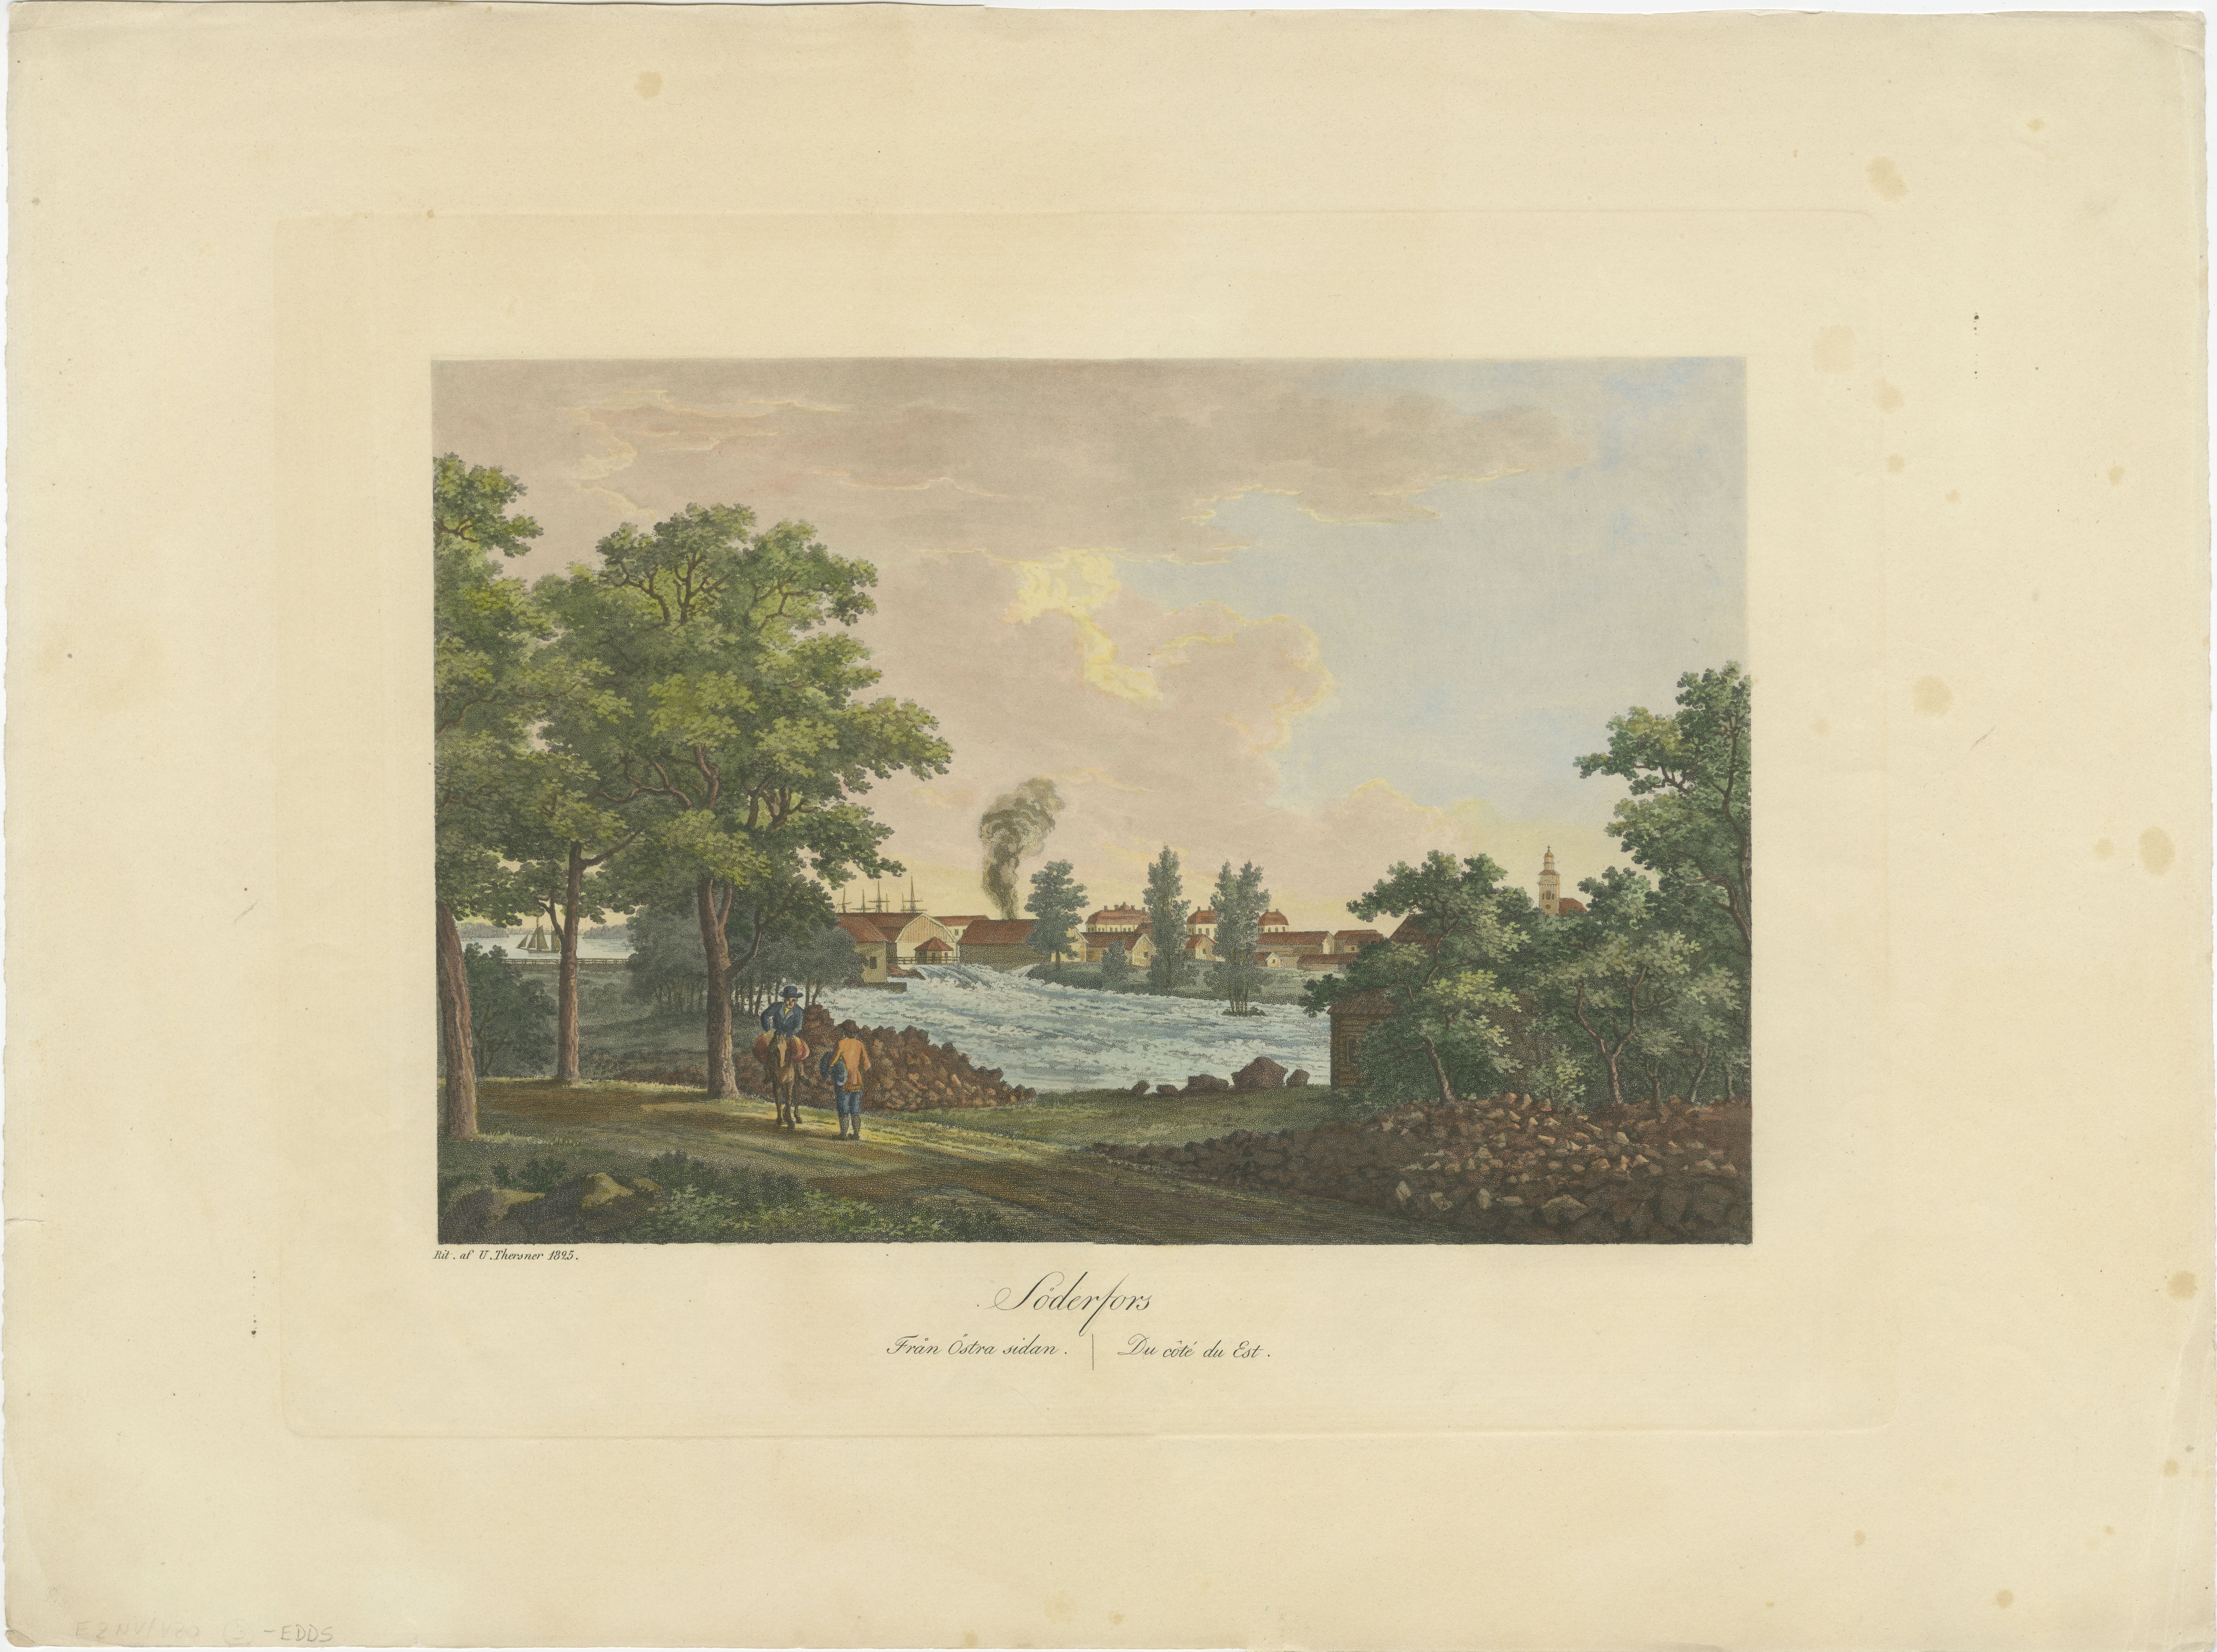 This original antique aquatint is a picturesque depiction of Söderfors, a place likely to be in Sweden, given the naming convention and style of the artwork. Crafted by Ulrik Thersner in 1825, the image portrays a vibrant, pastoral scene set by a